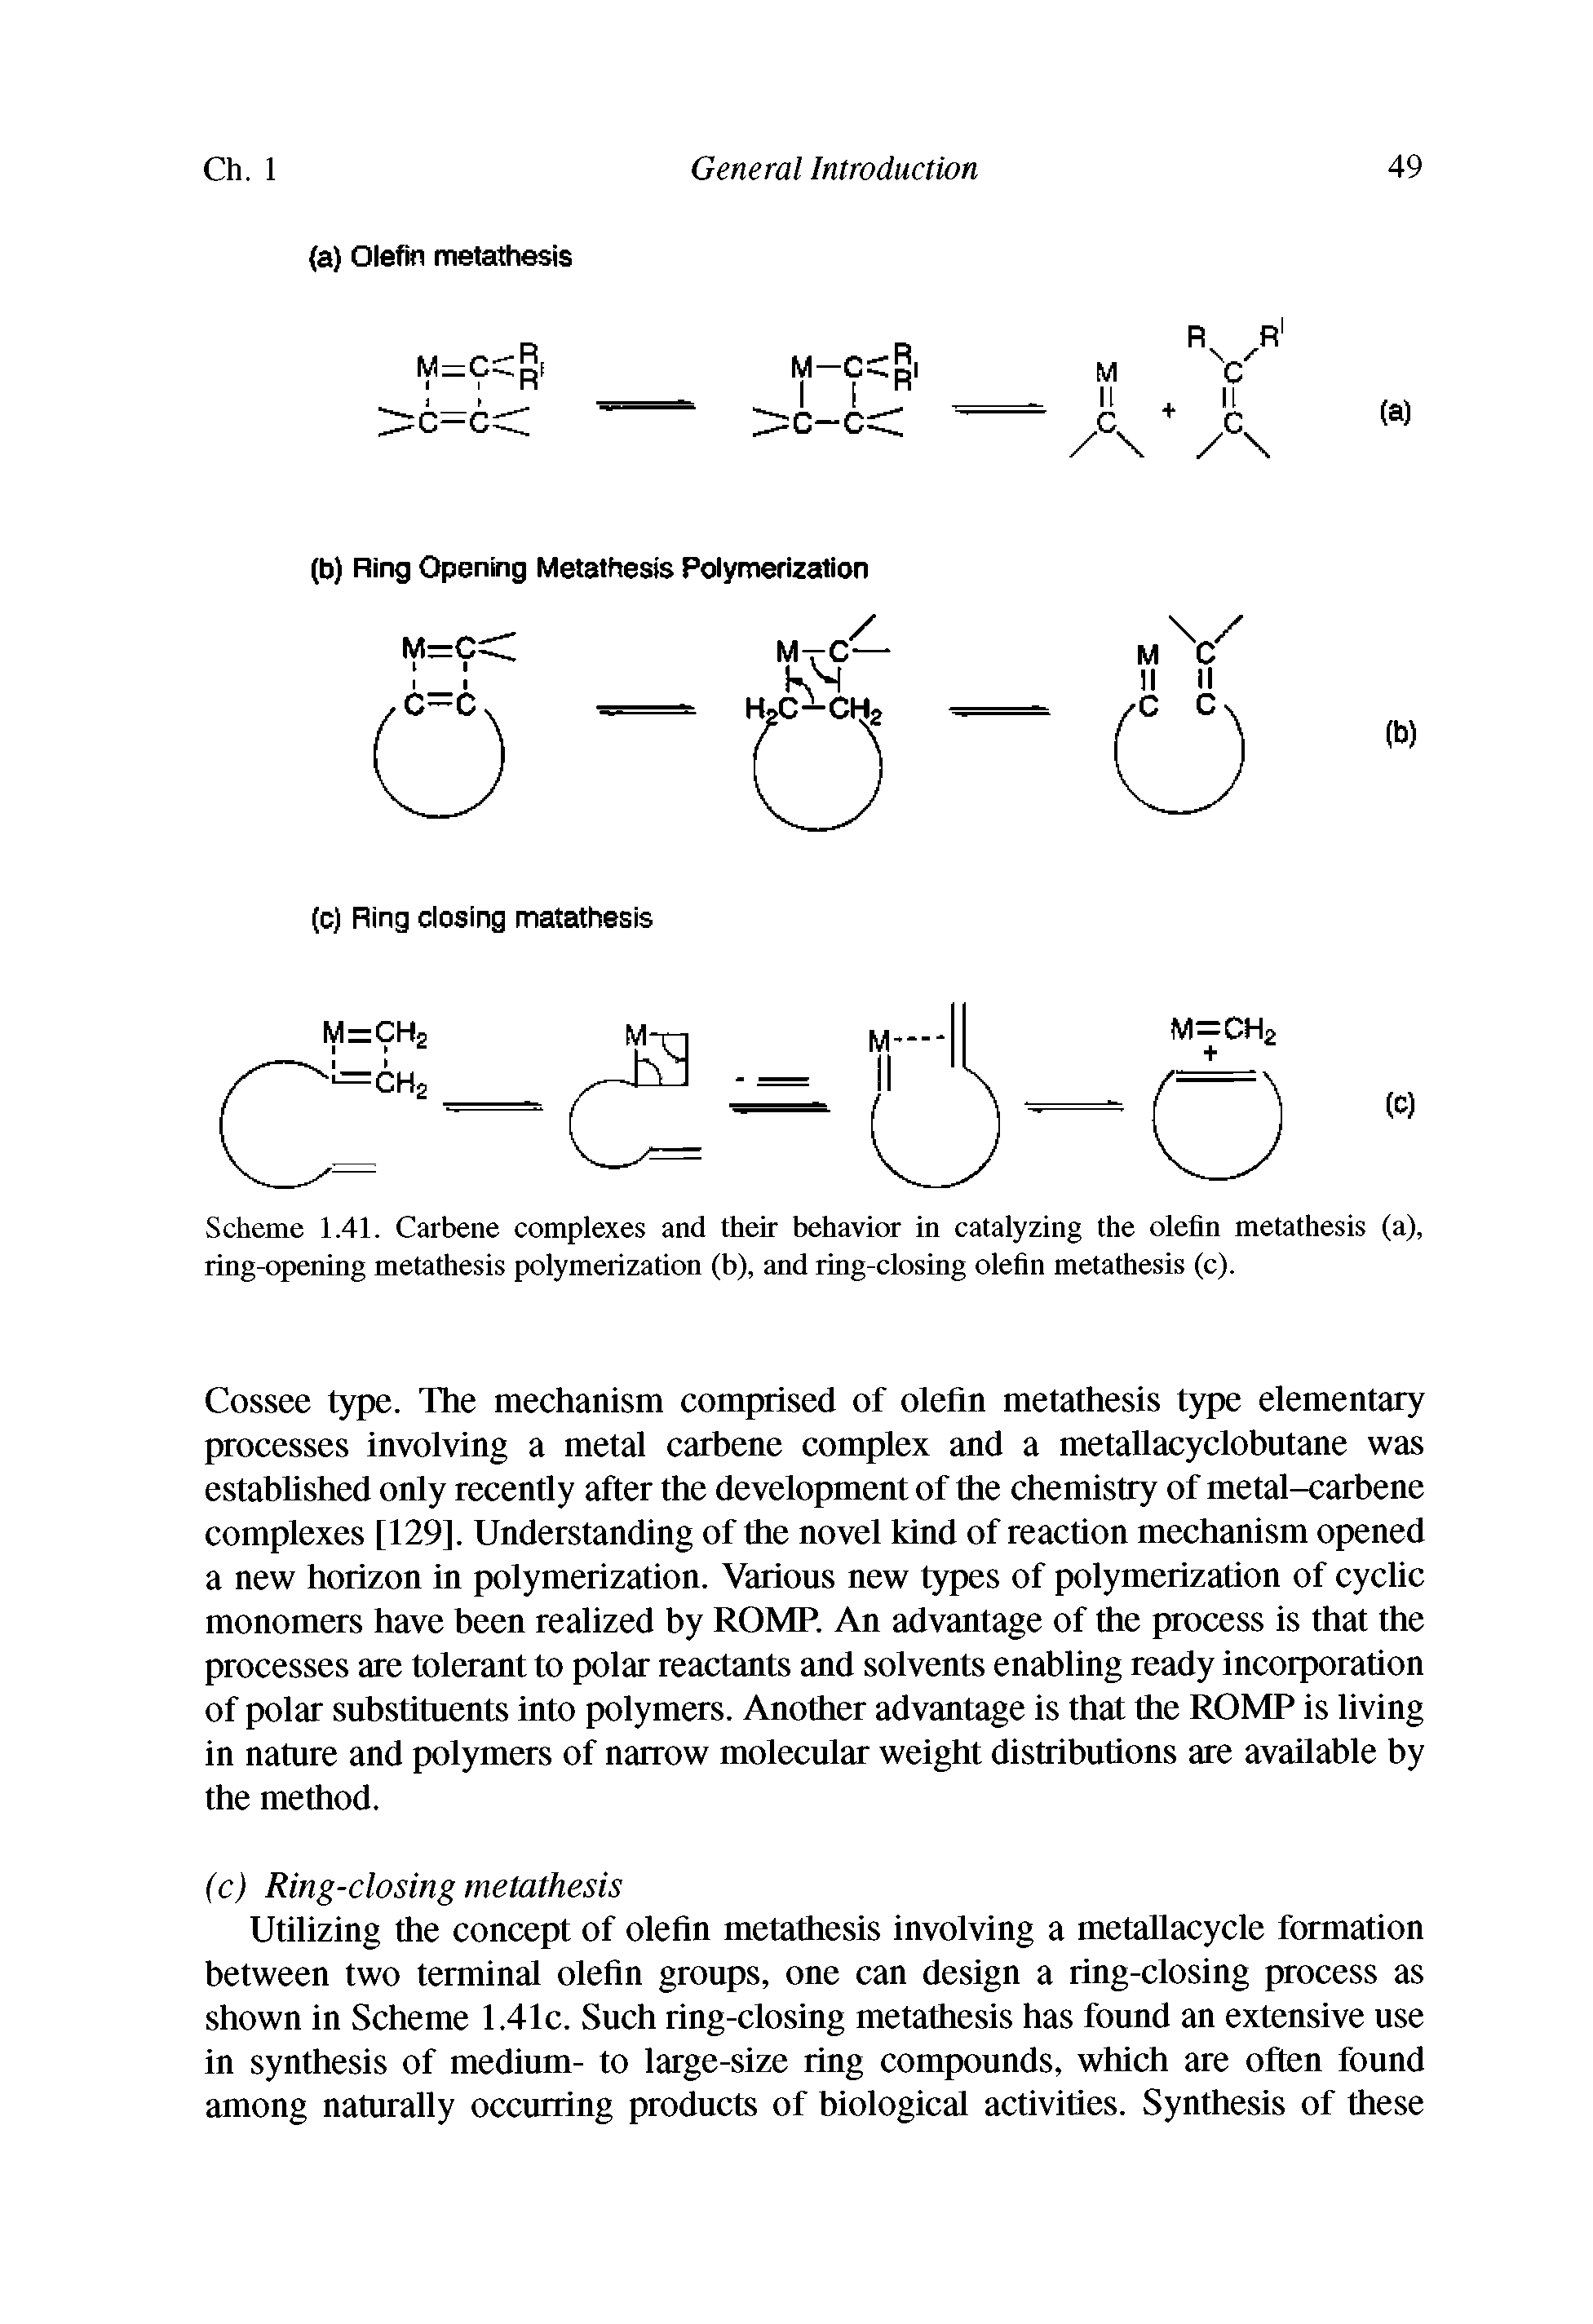 Scheme 1.41. Carbene complexes and their behavior in catalyzing the olefin metathesis (a), ring-opening metathesis polymerization (b), and ring-closing olefin metathesis (c).